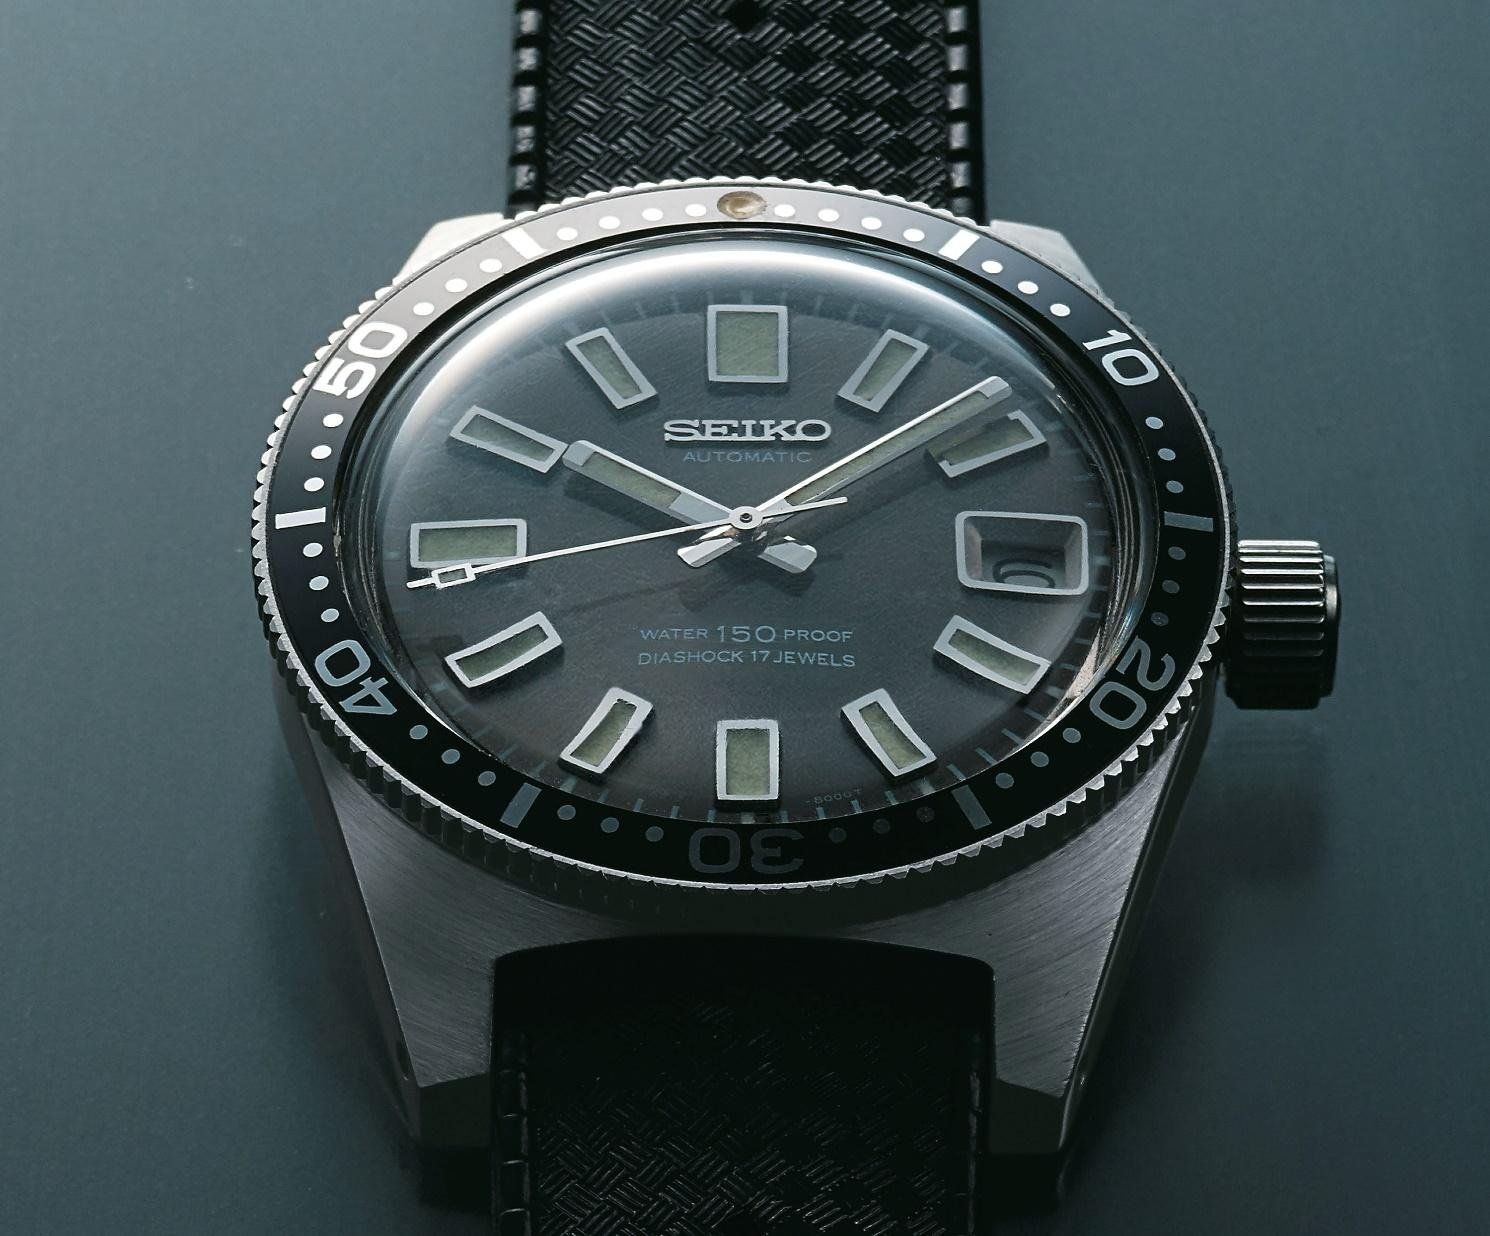 The original 62MAS Ref. 6217-9001 from 1965 - Seiko's first ever professional diver’s watch. 